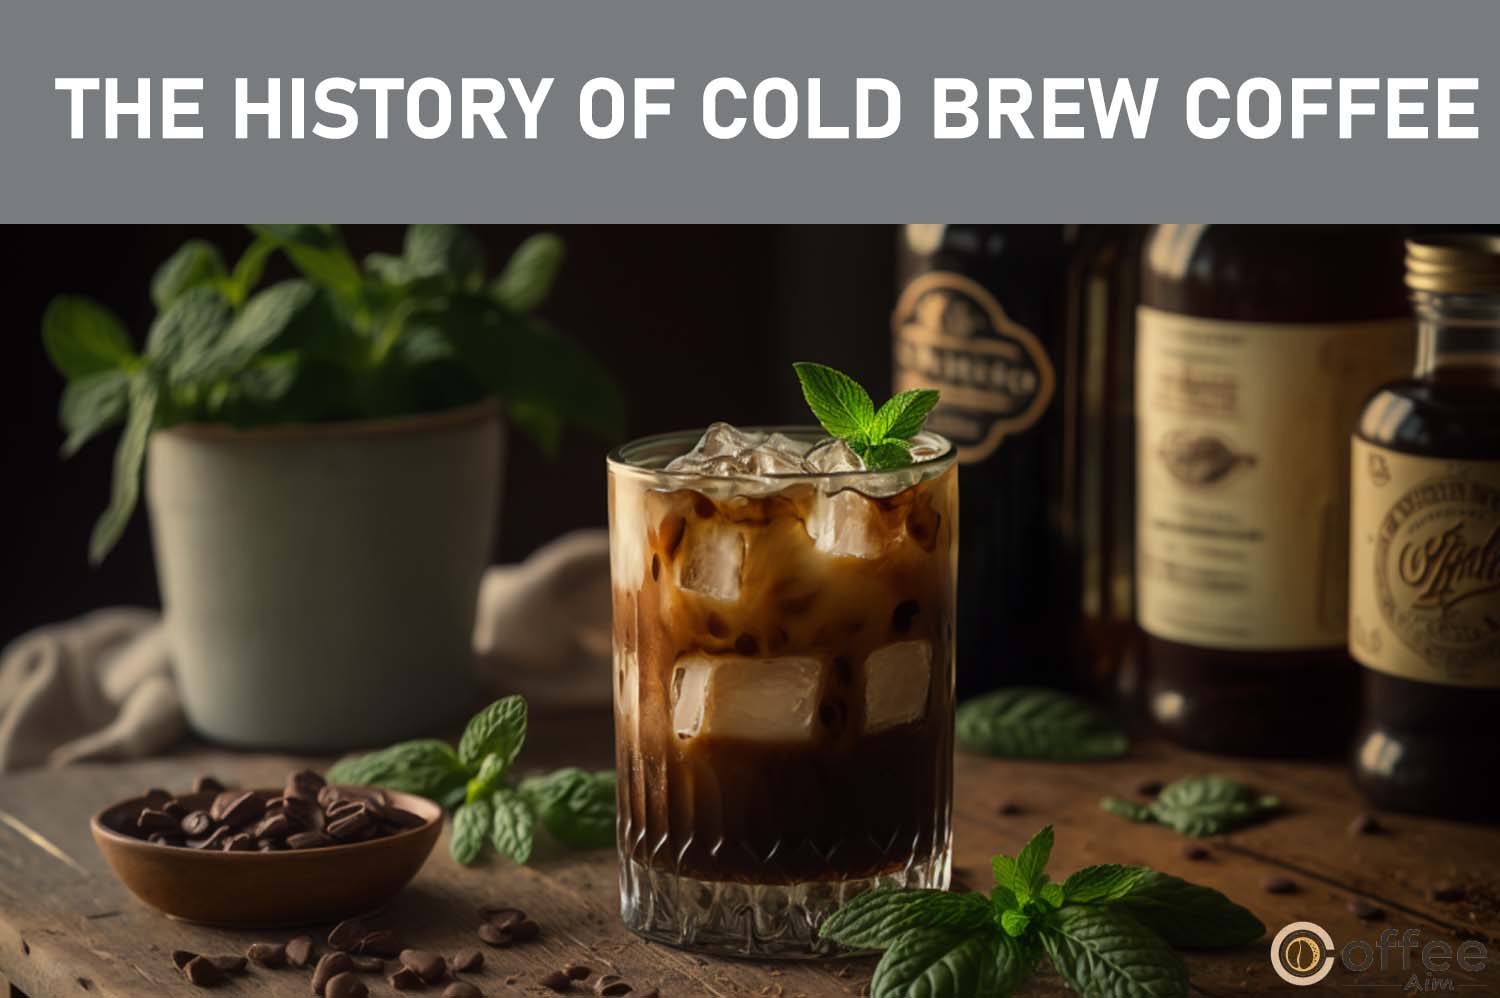 Featured image for the article "The History of Cold Brew Coffee"